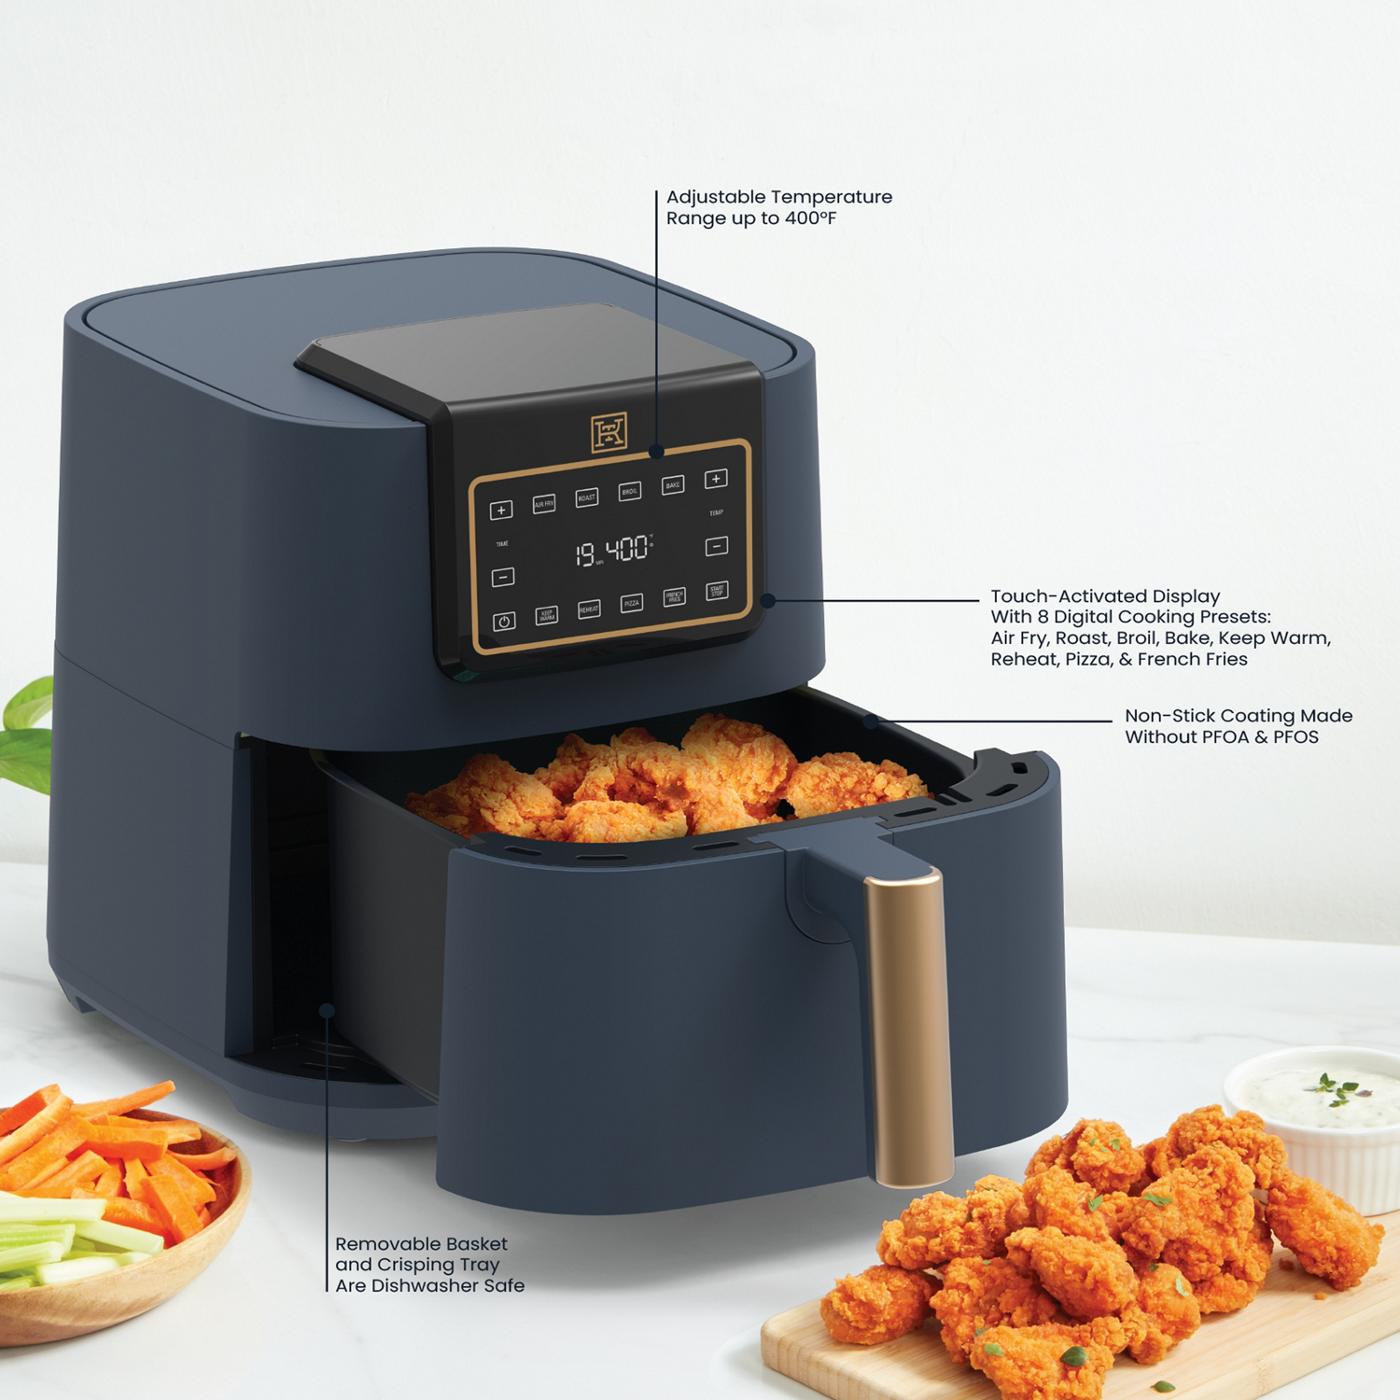 Kitchen & Table by H-E-B Digital Air Fryer - Ocean Blue; image 8 of 8